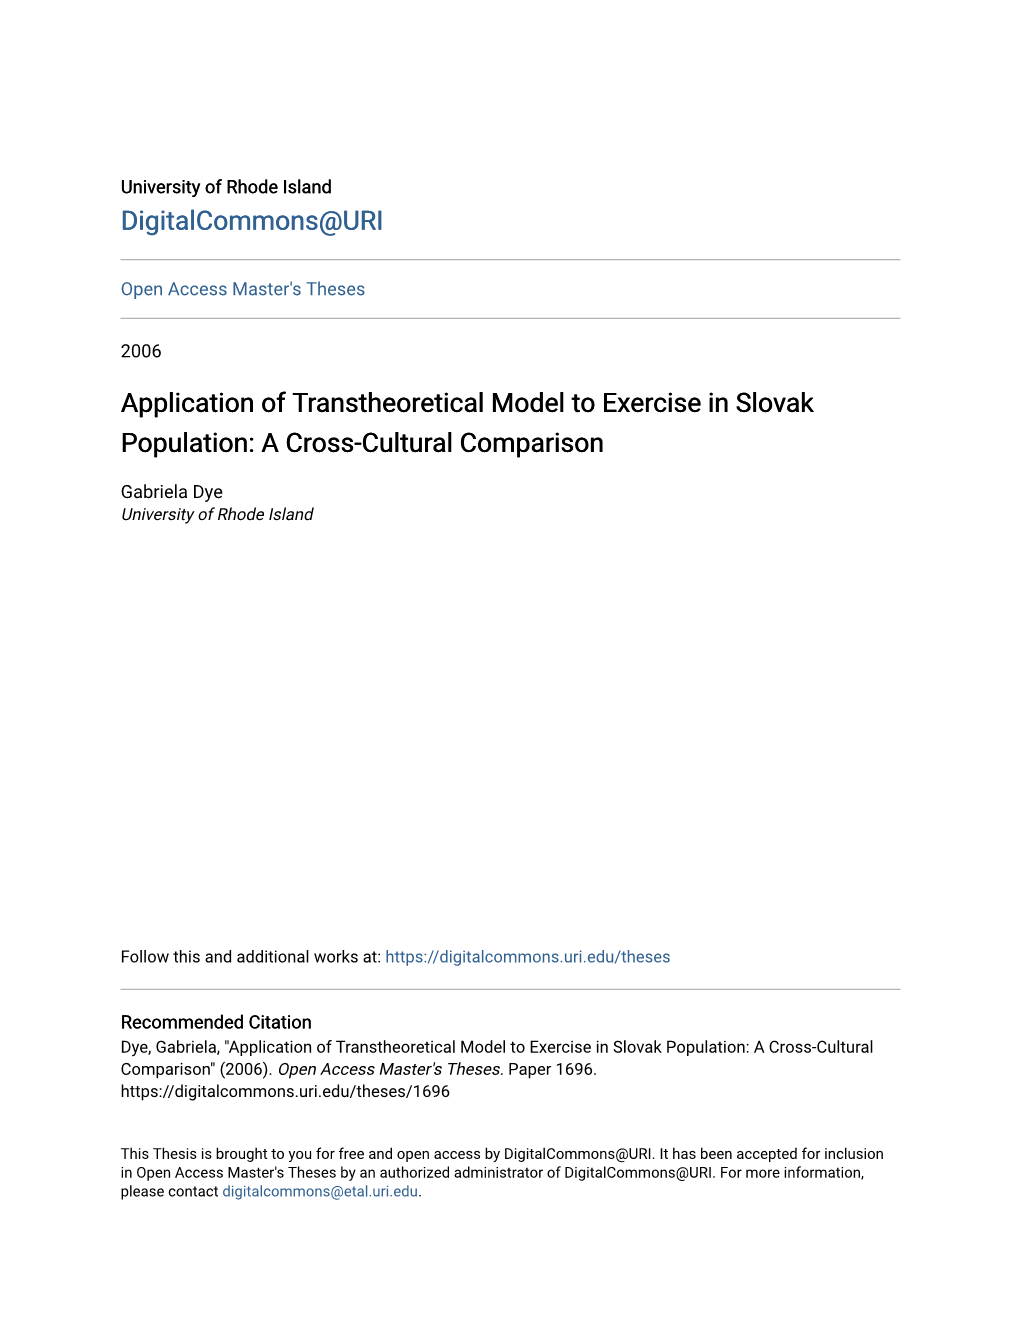 Application of Transtheoretical Model to Exercise in Slovak Population: a Cross-Cultural Comparison